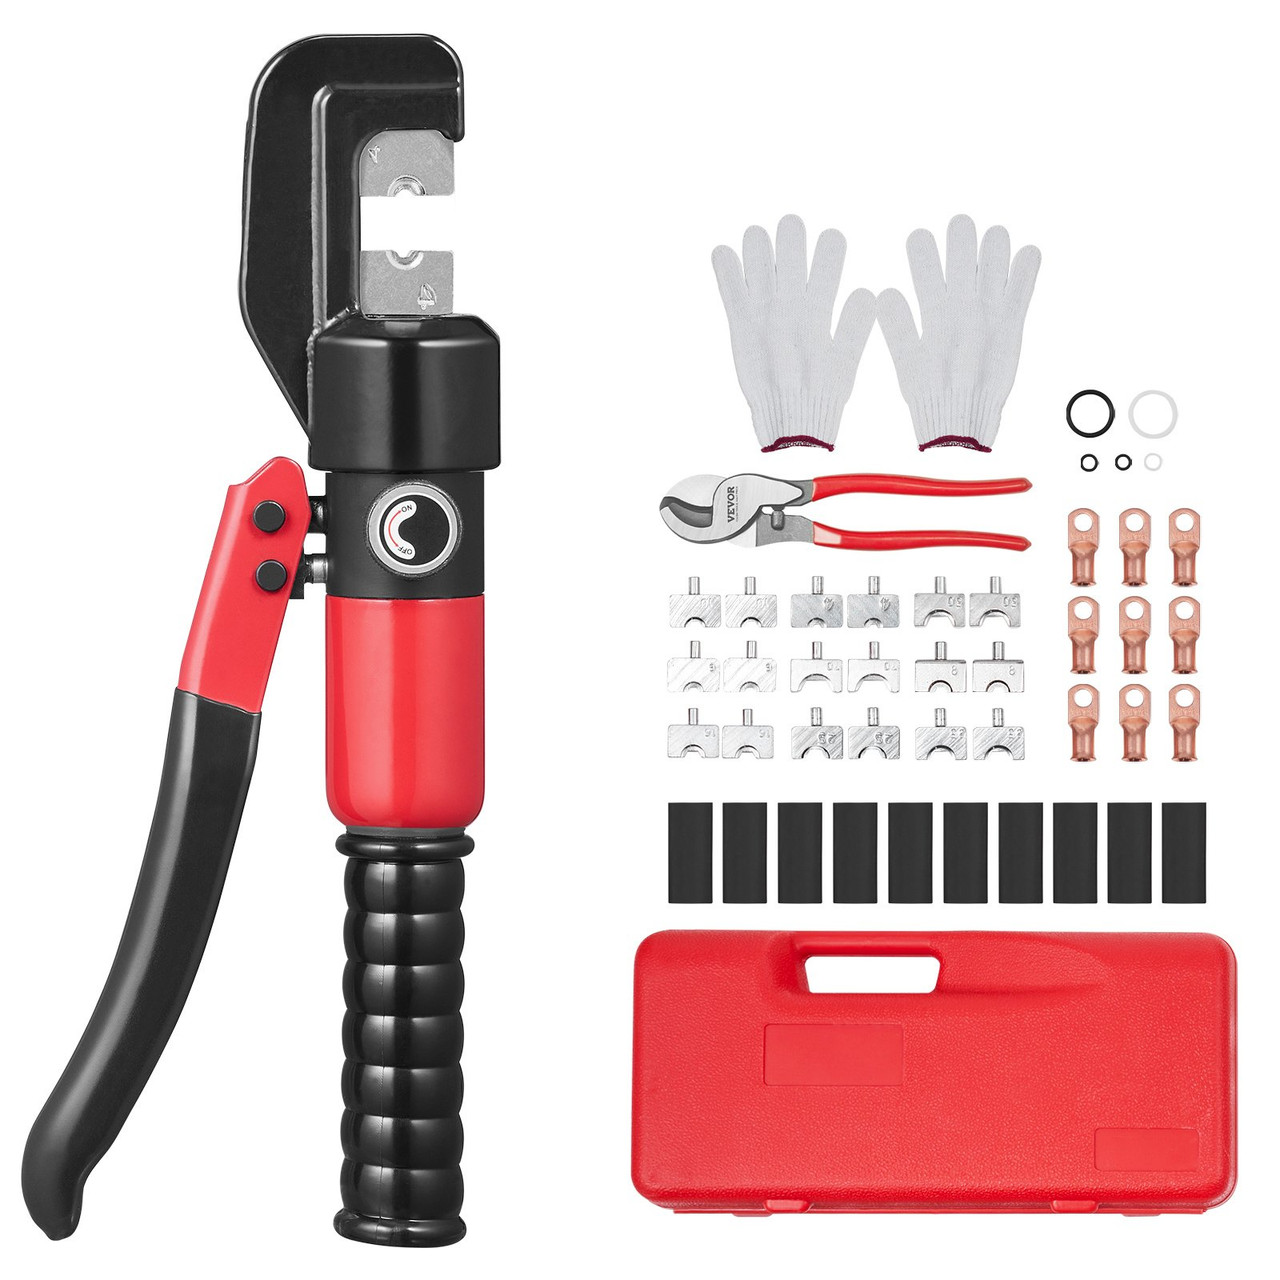 VEVOR Hydraulic Crimping Tool with 9 Sets of Dies AWG12-2/0 Copper And Aluminum Terminal Battery Lug Crimper, with a Cutting Pliers, Gloves, 10pcs Copper Ring Connectors, 8pcs Heat Shrink Sleeves